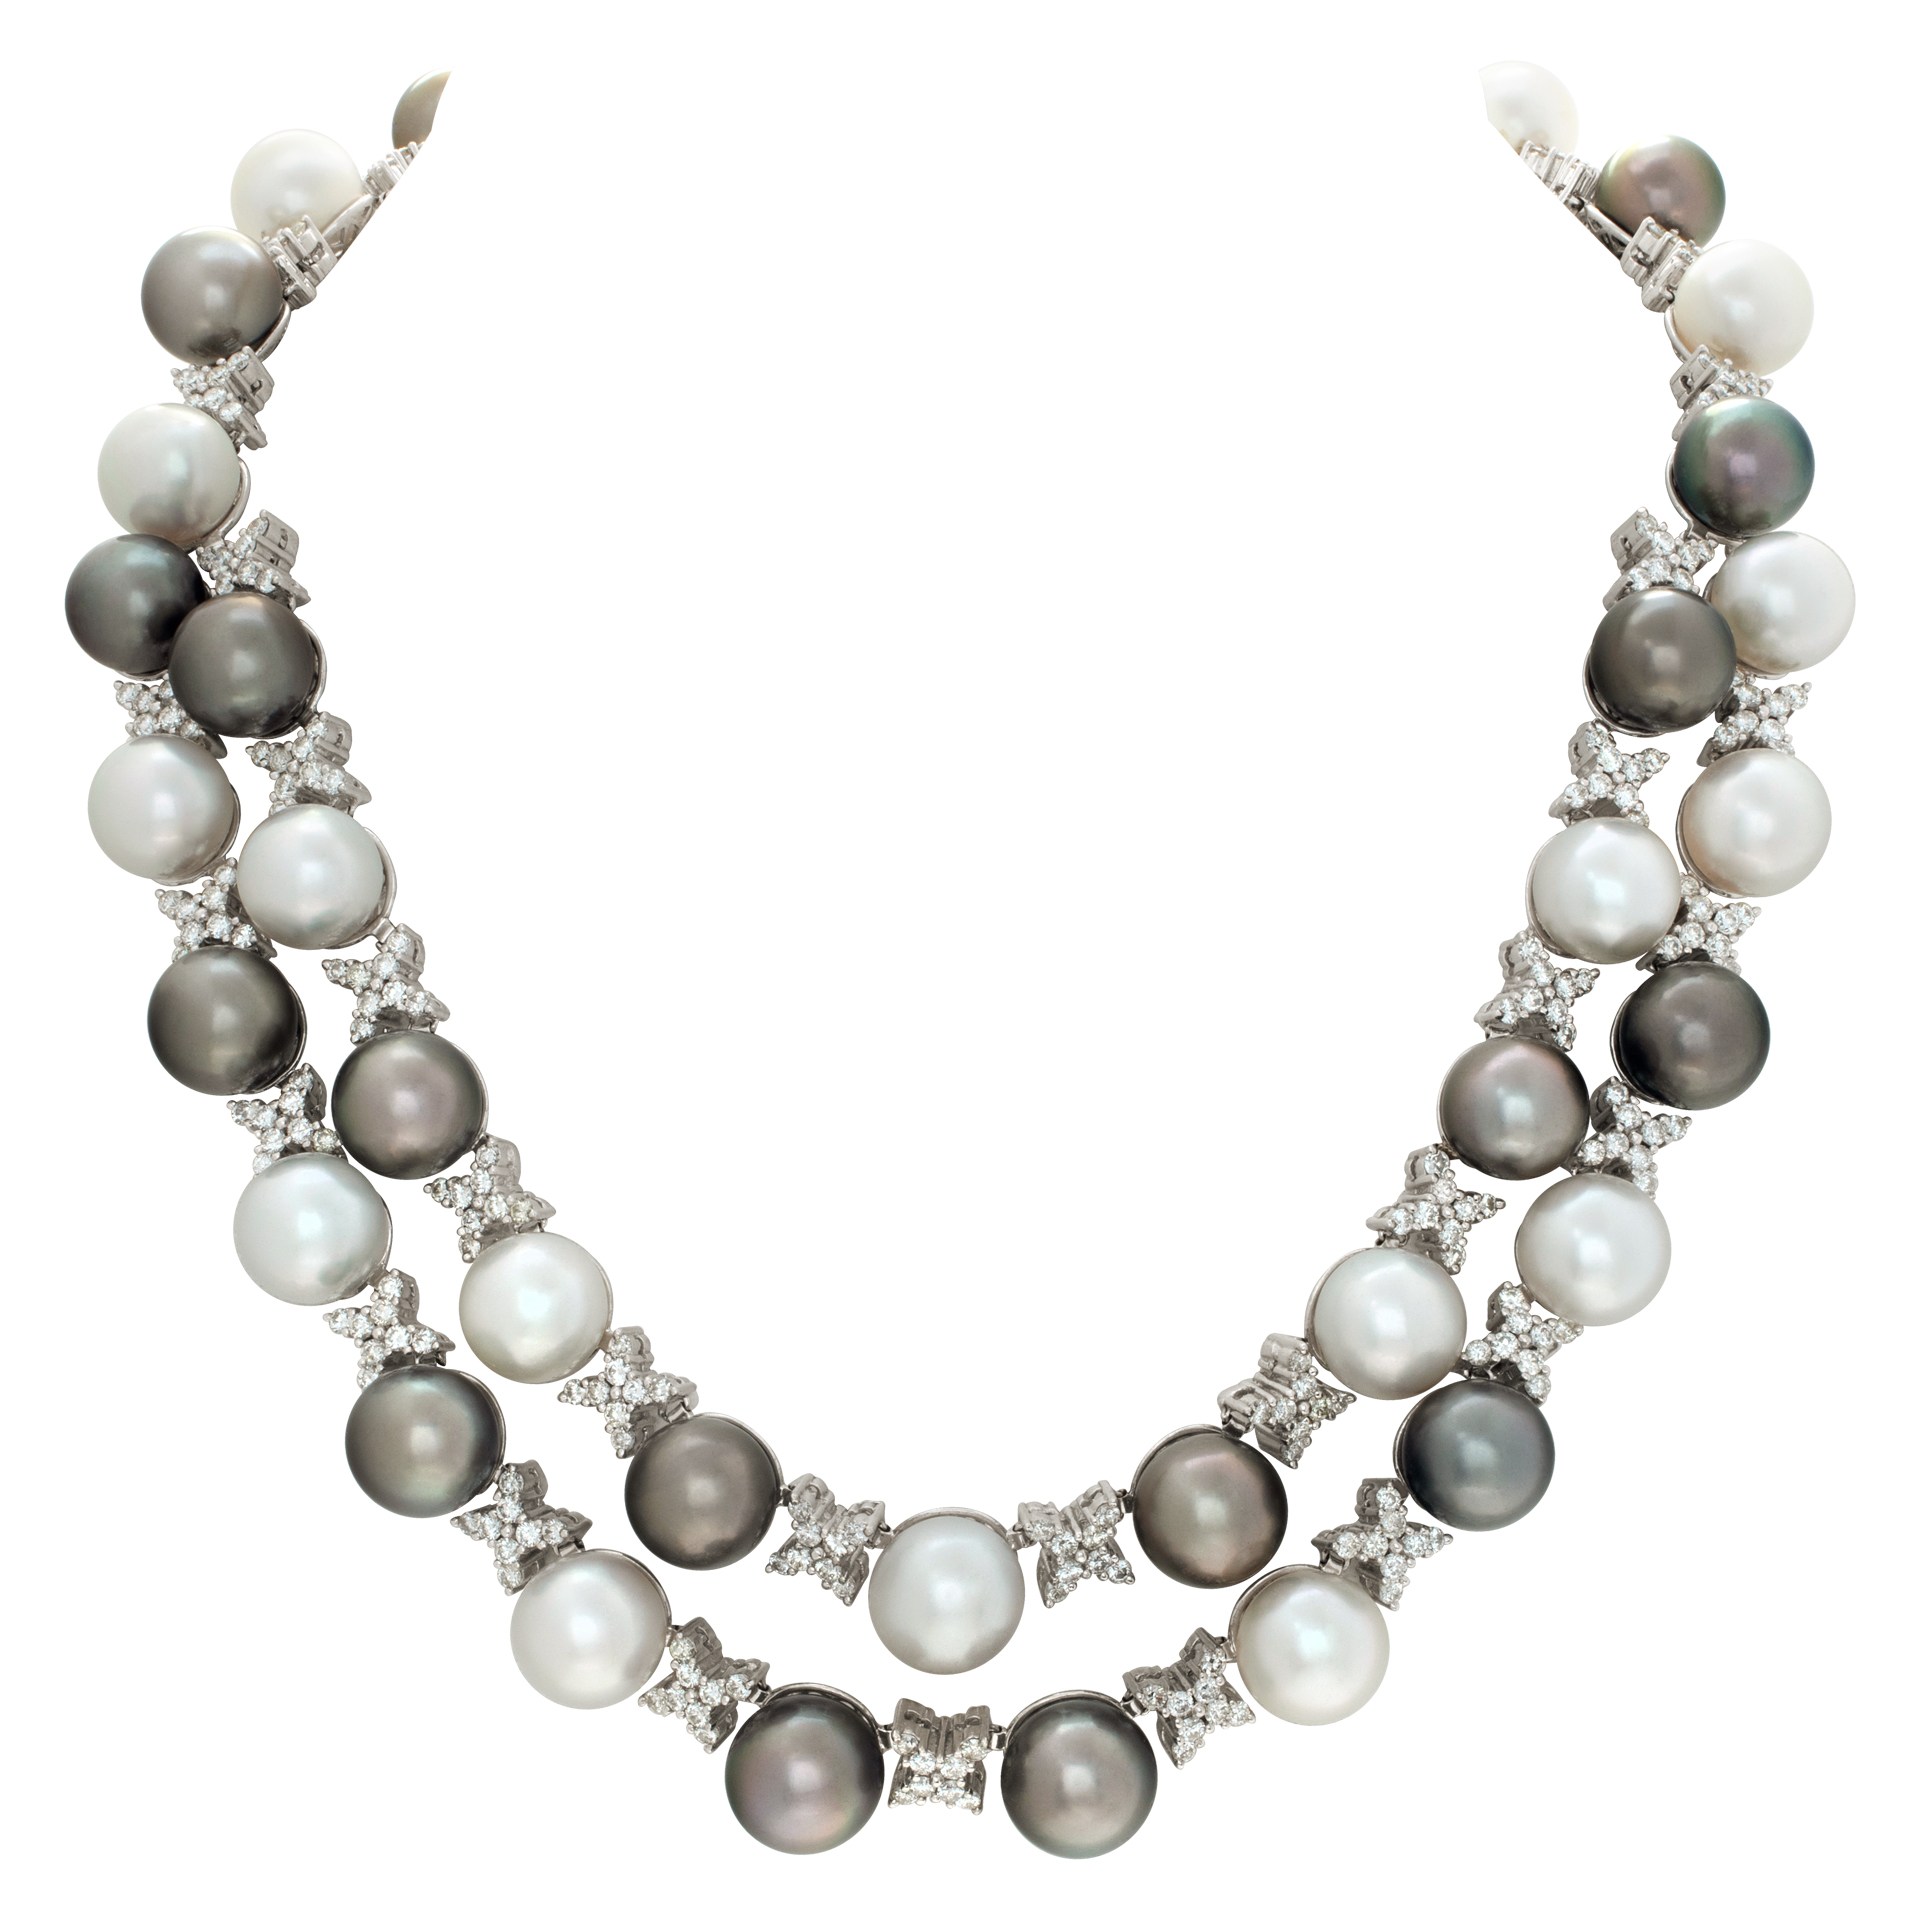 South Sea (white), Tahitian (gray) pearls & diamonds necklace, set in 18k white gold. image 1